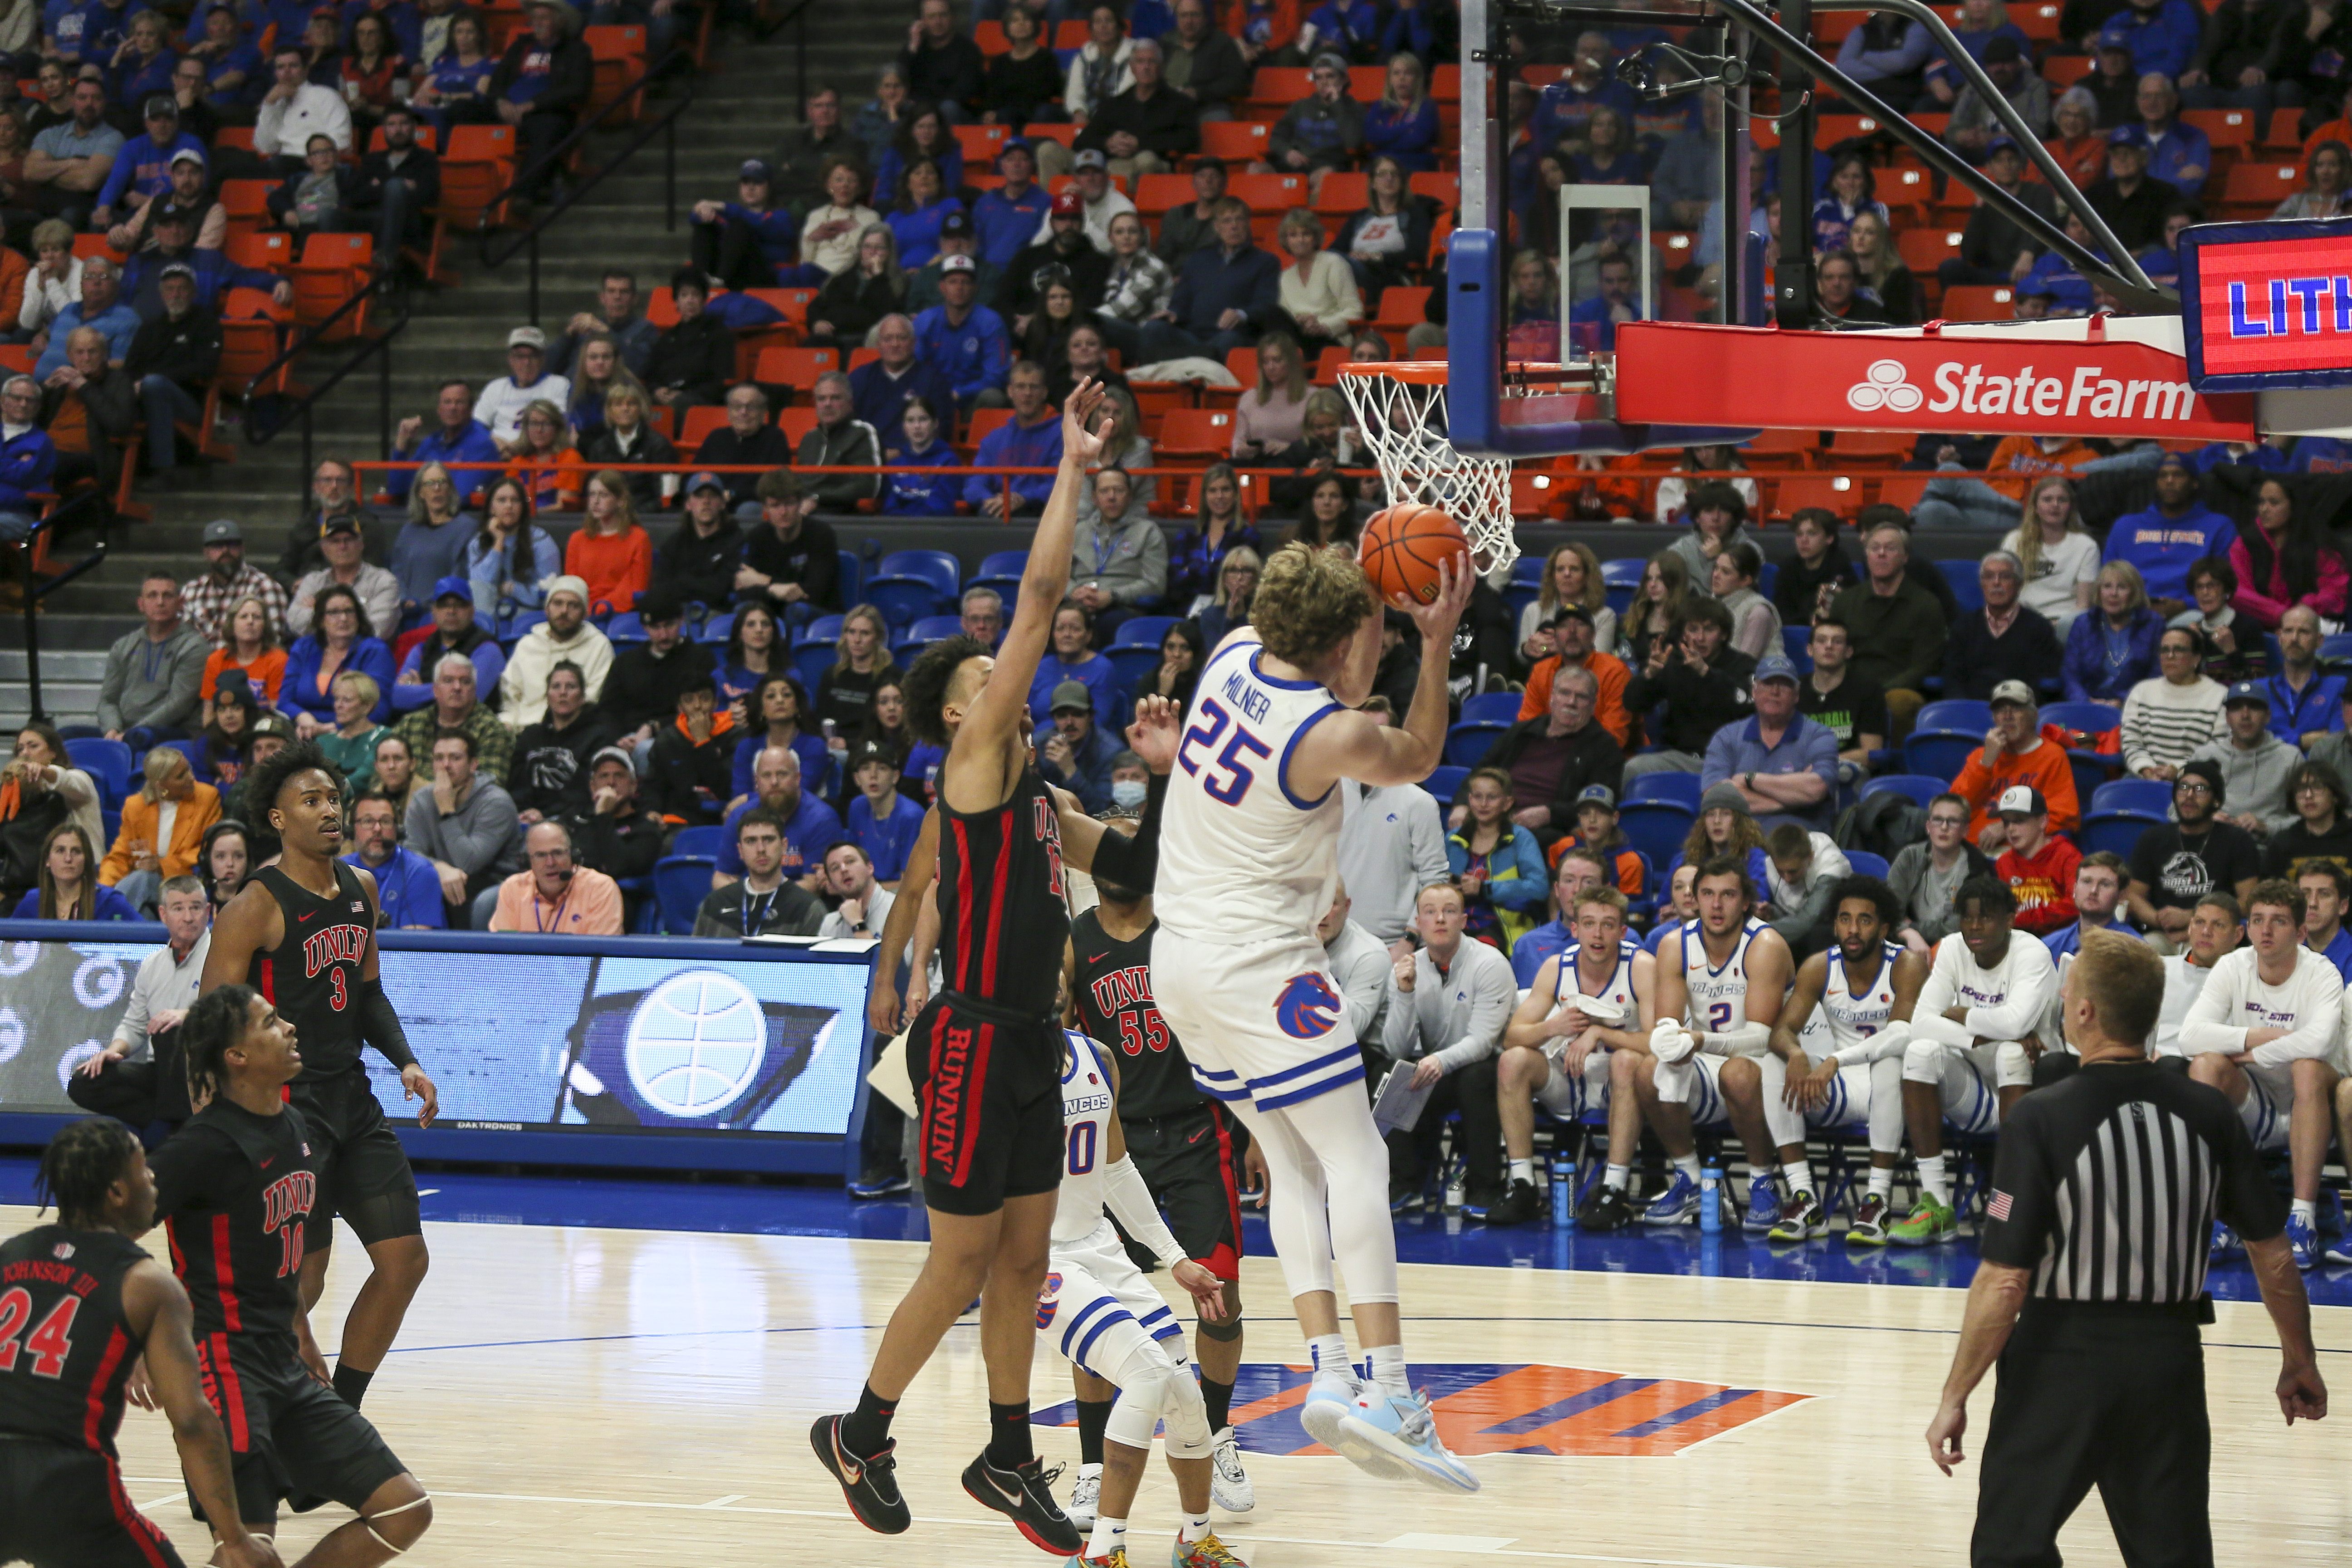 NCAA Basketball: UNLV at Boise State